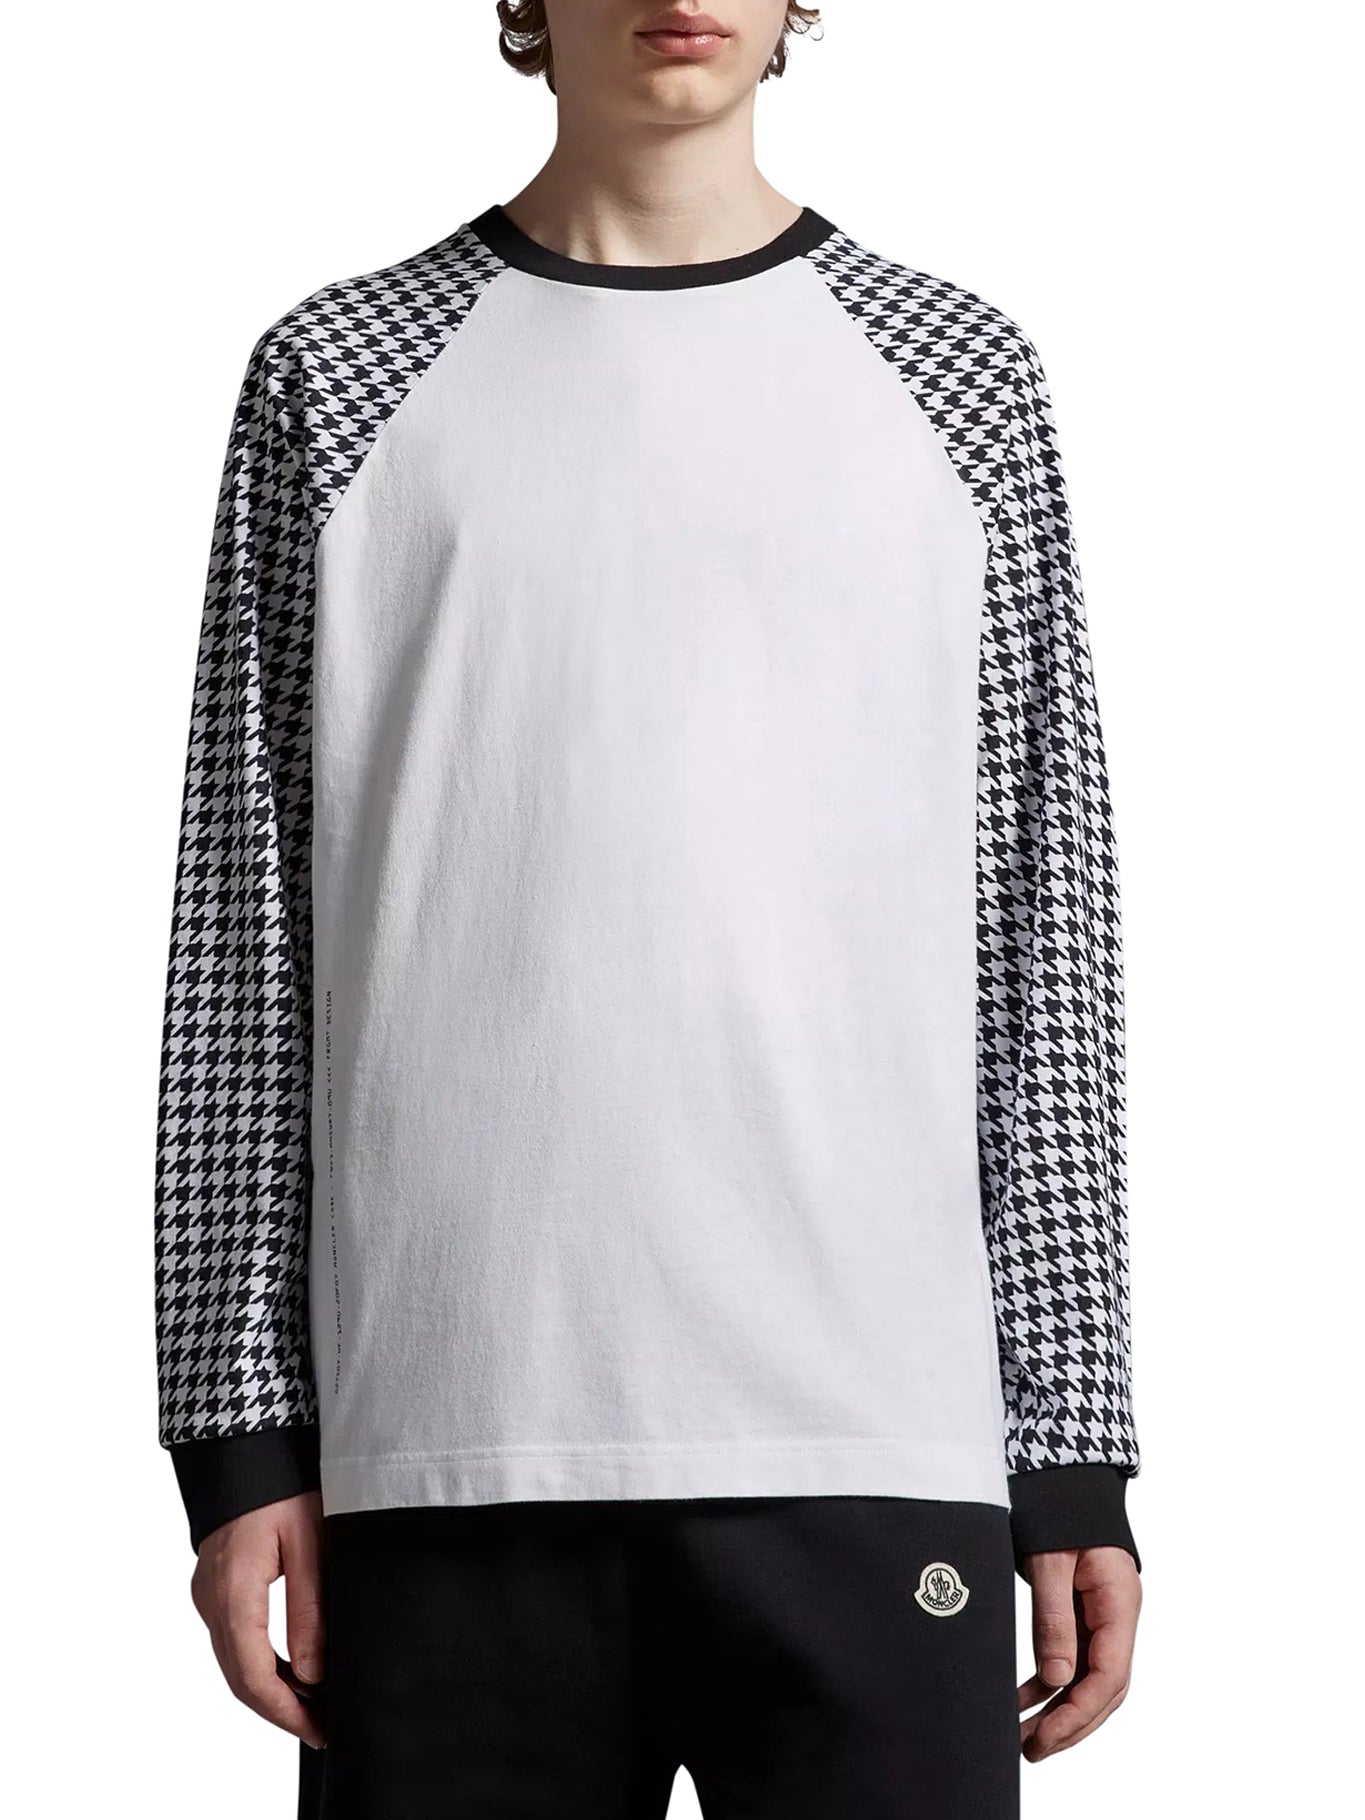 T-shirt with houndstooth motif